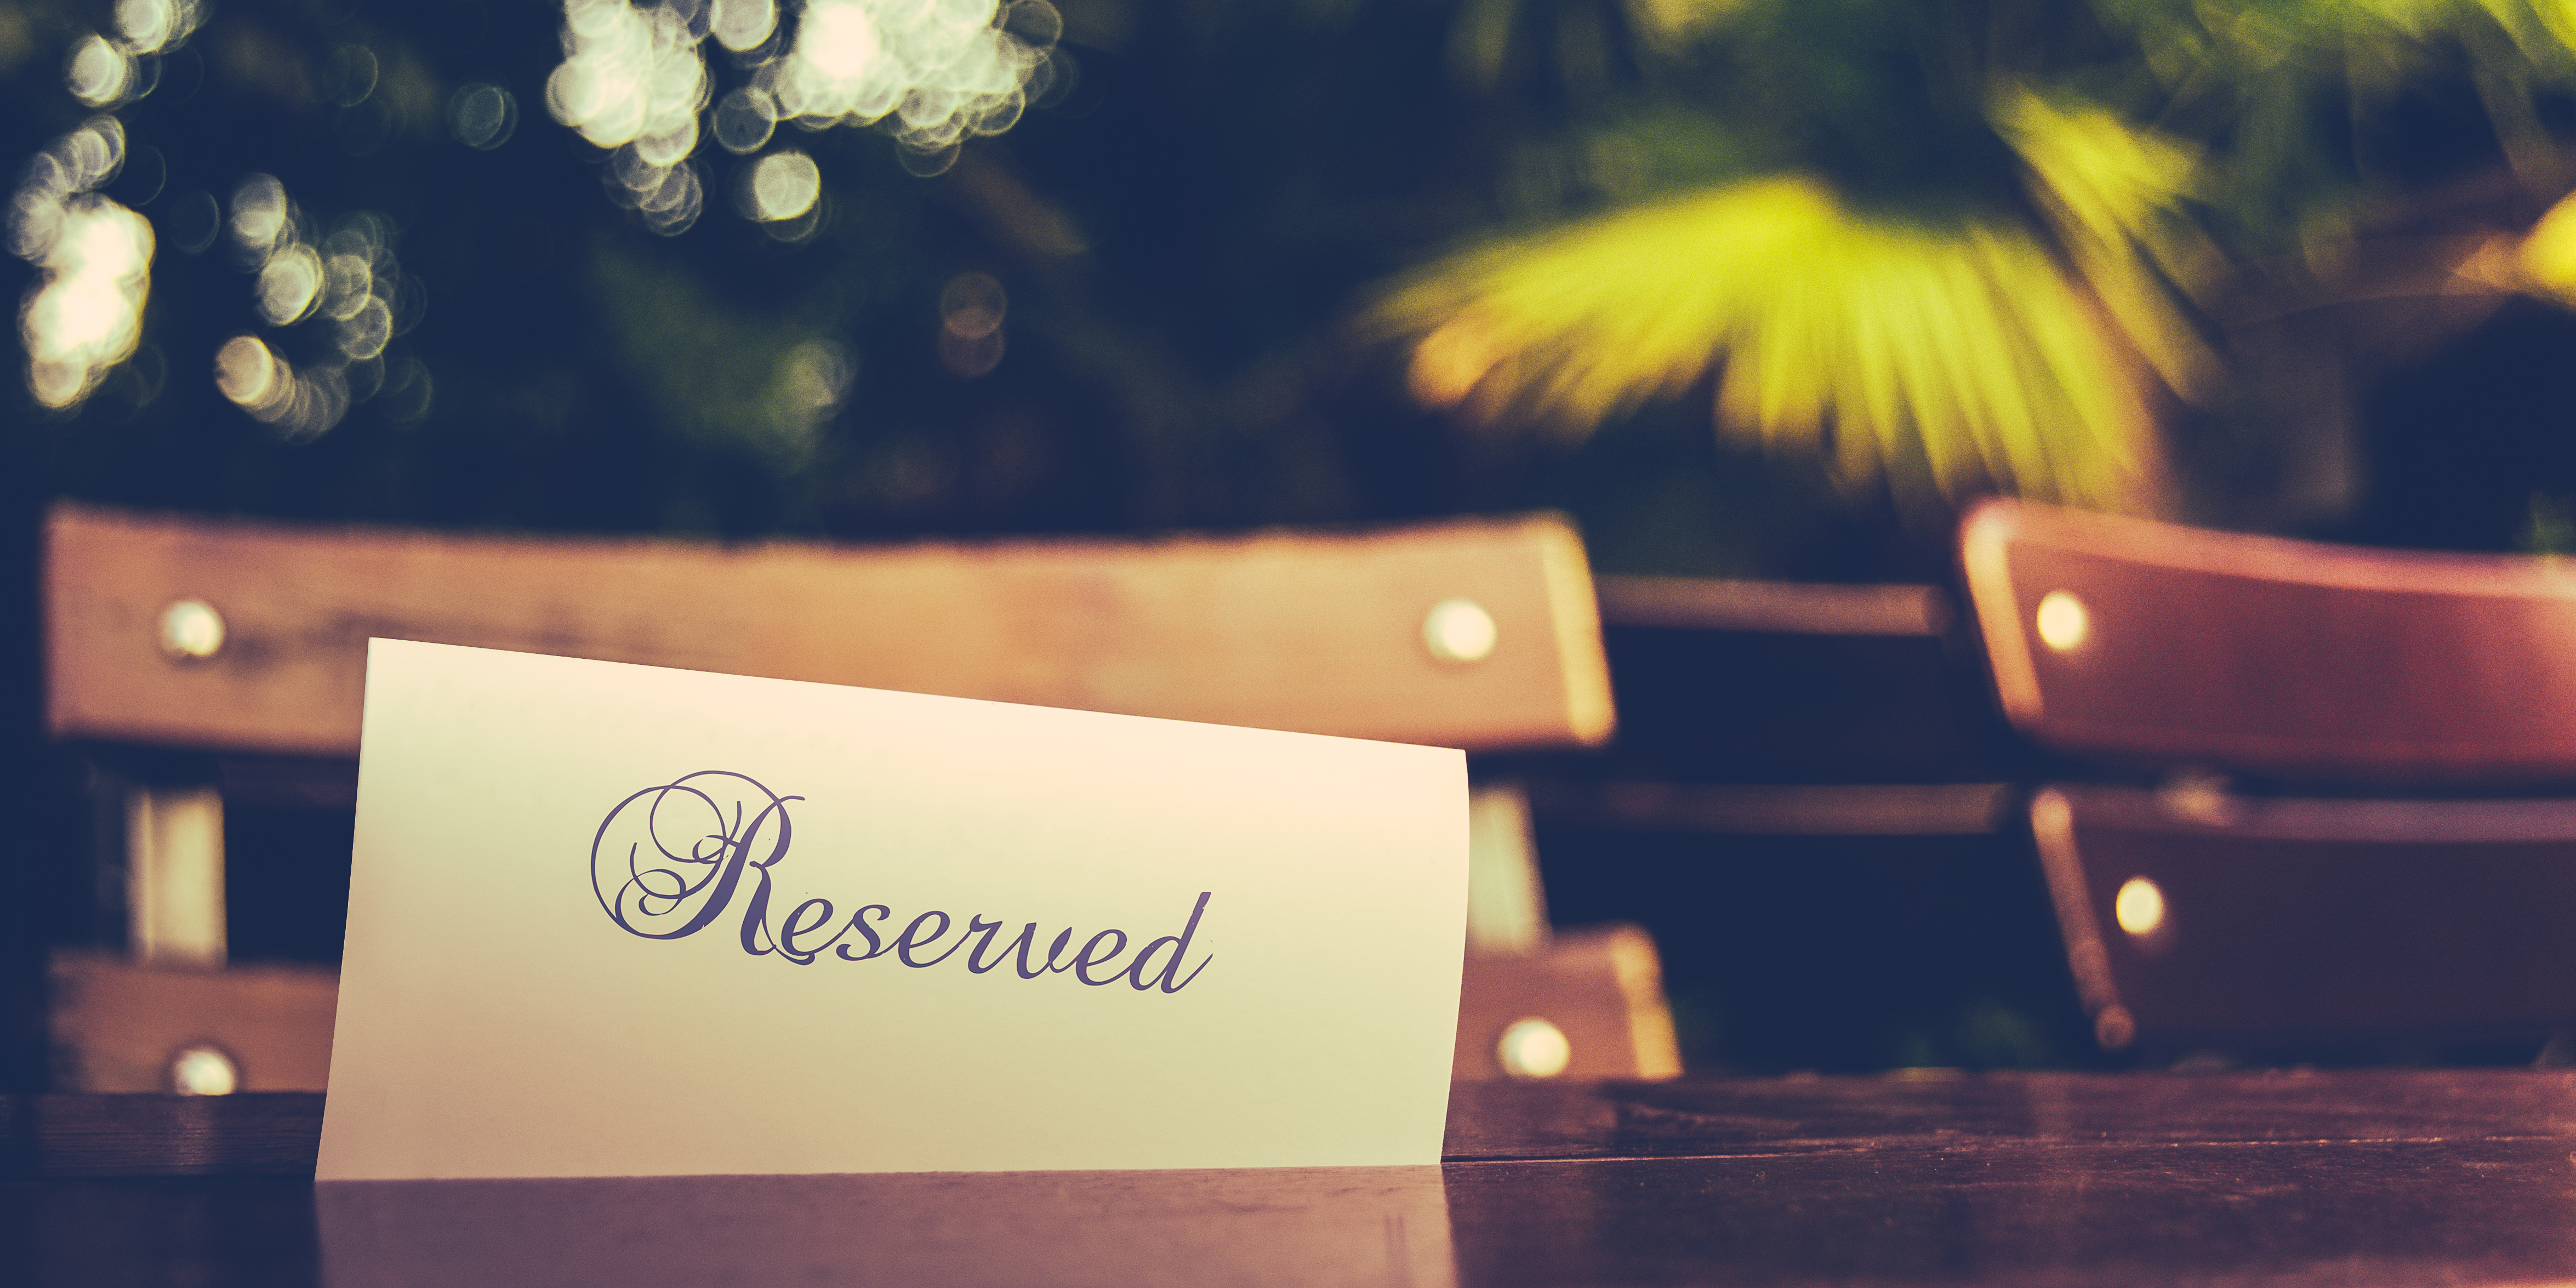 Reserved card outside on wooden table